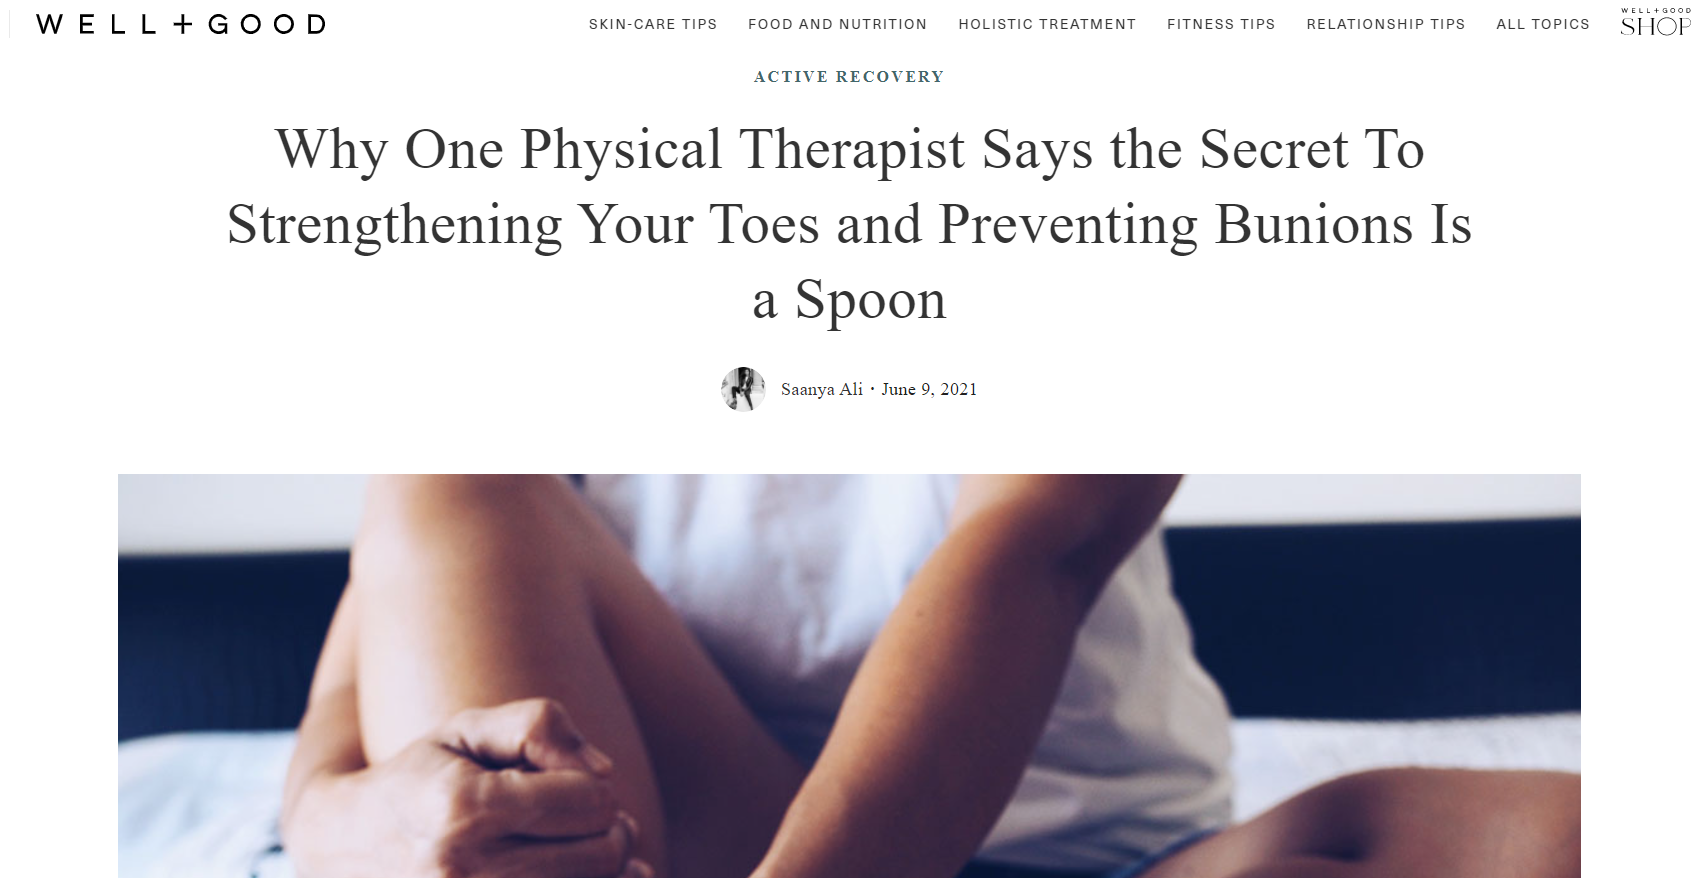 Why One Physical Therapist Says the Secret To Strengthening Your Toes and Preventing Bunions Is a Spoon